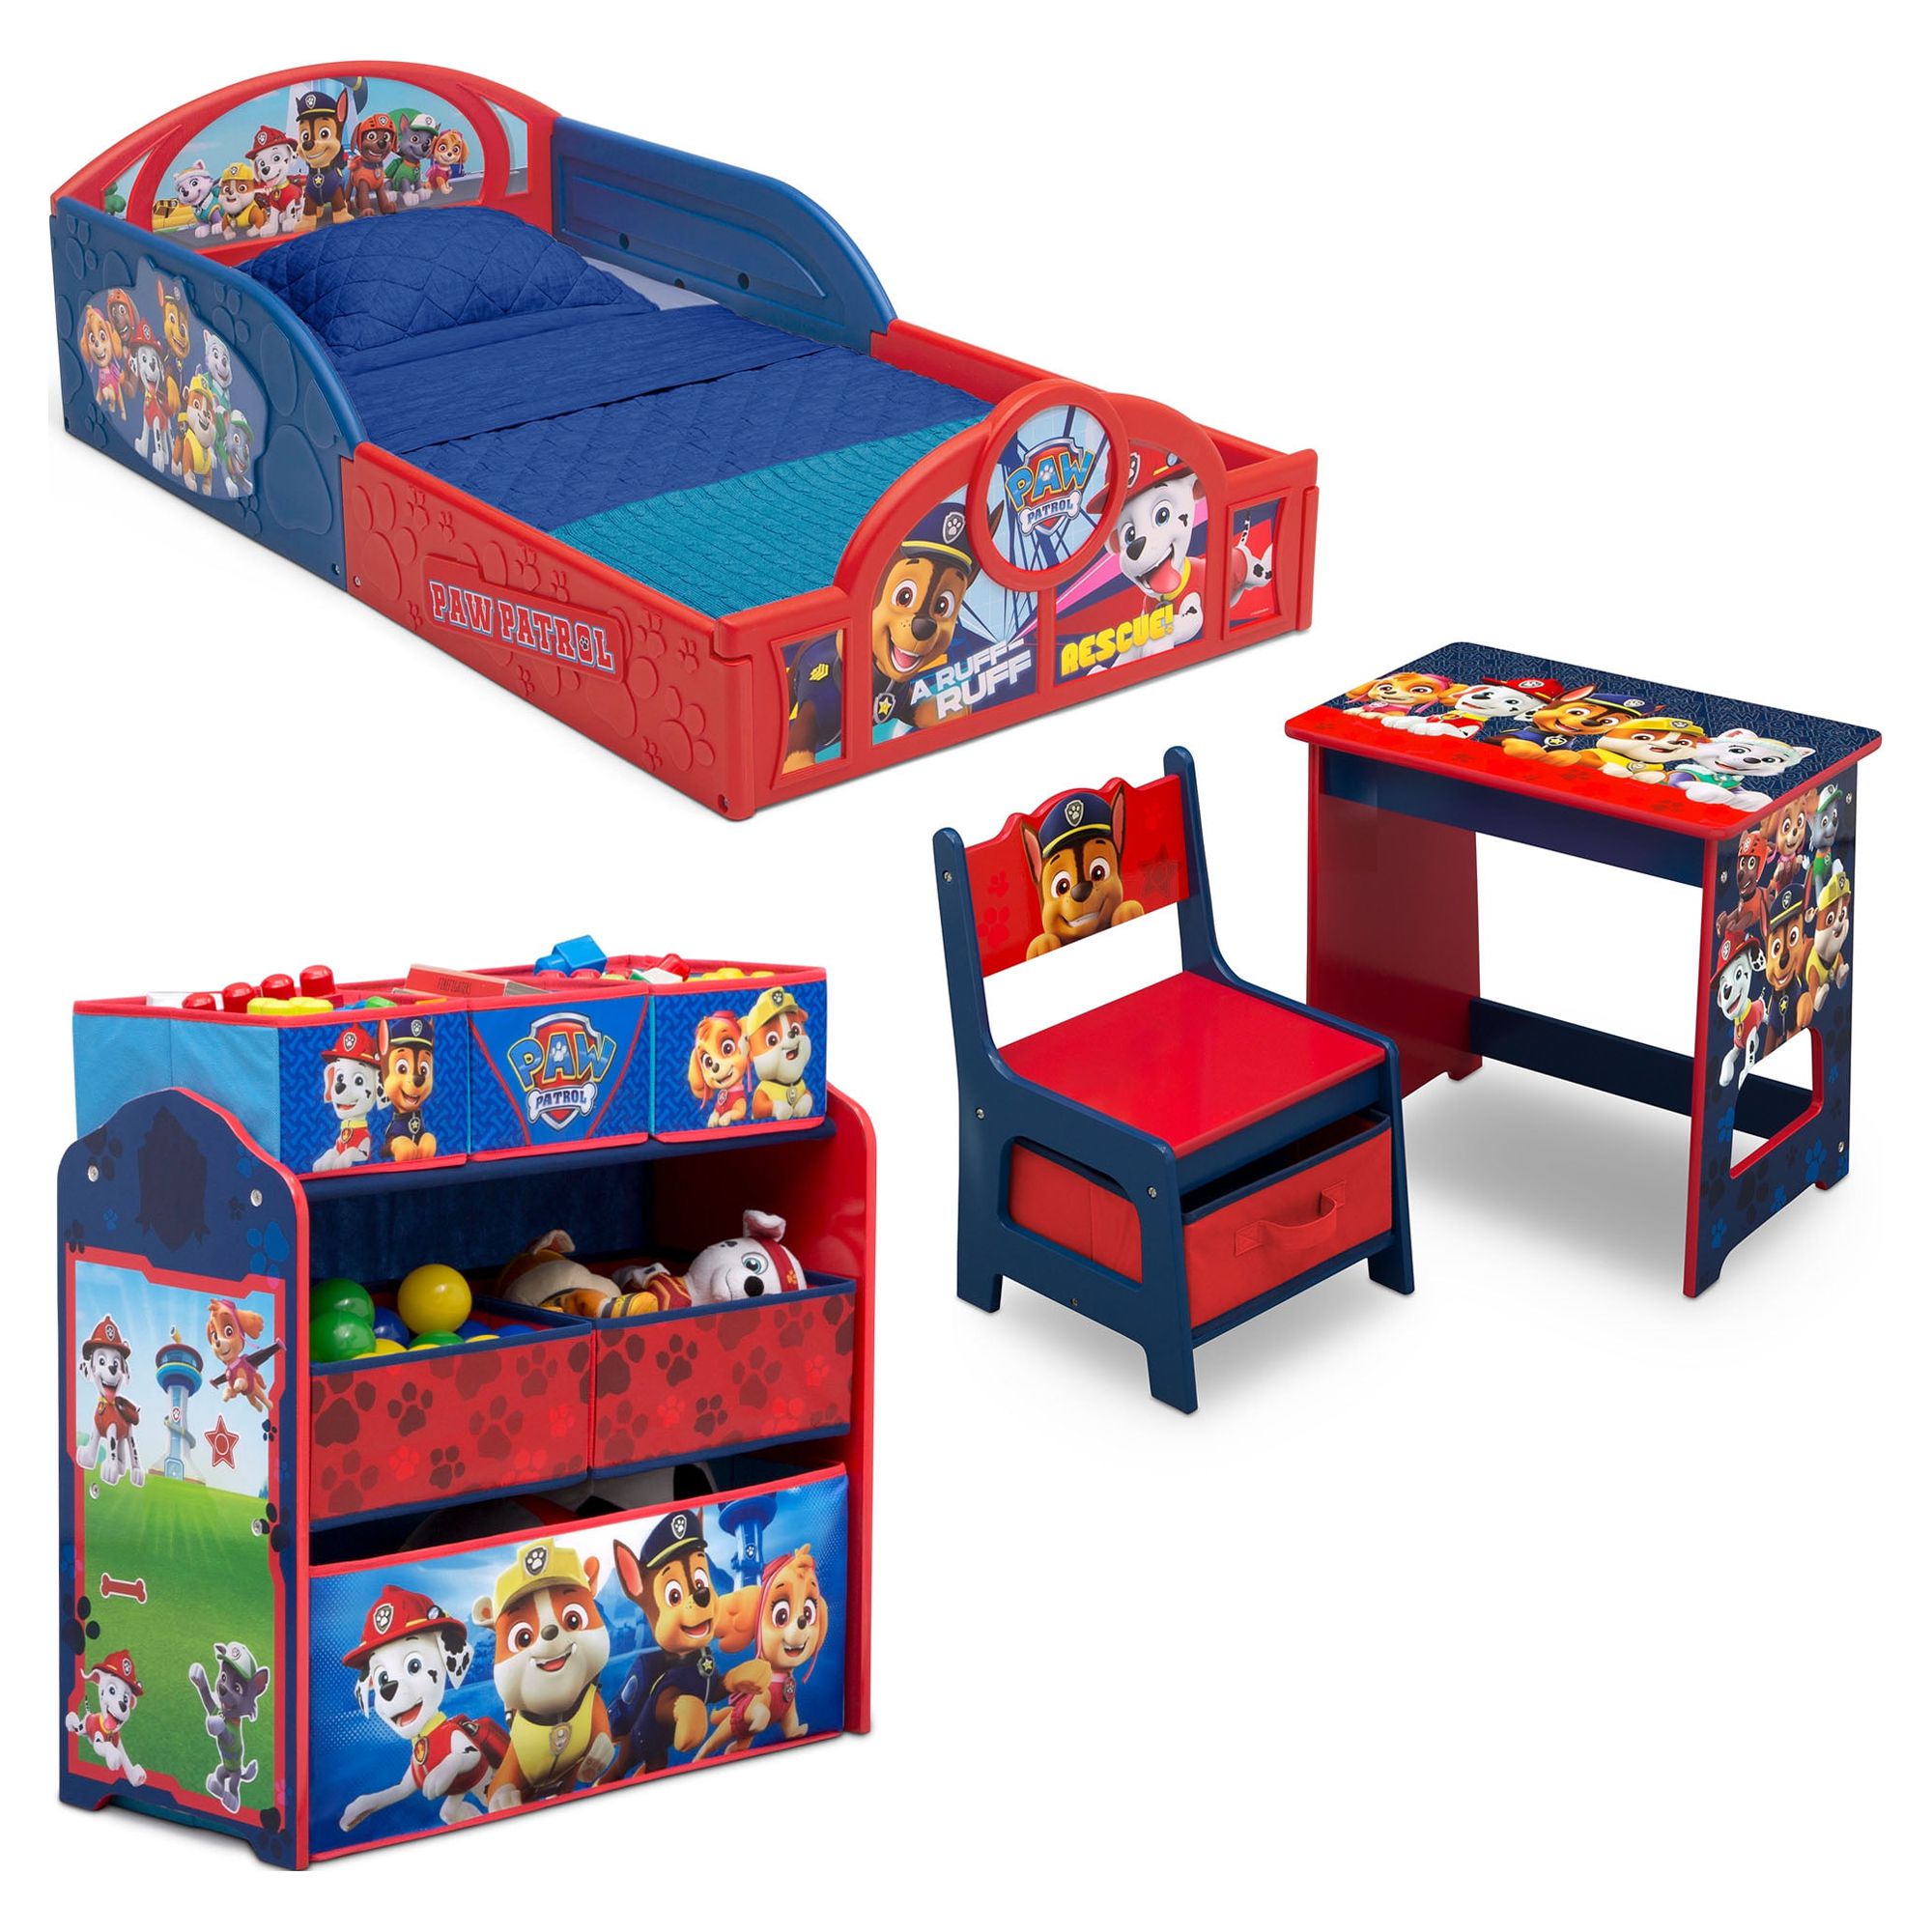 Nick Jr. PAW Patrol 4-Piece Room-in-a-Box Bedroom Set by Delta Children - Includes Sleep & Play Toddler Bed, 6 Bin Design & Store Toy Organizer and Desk with Chair - image 1 of 14